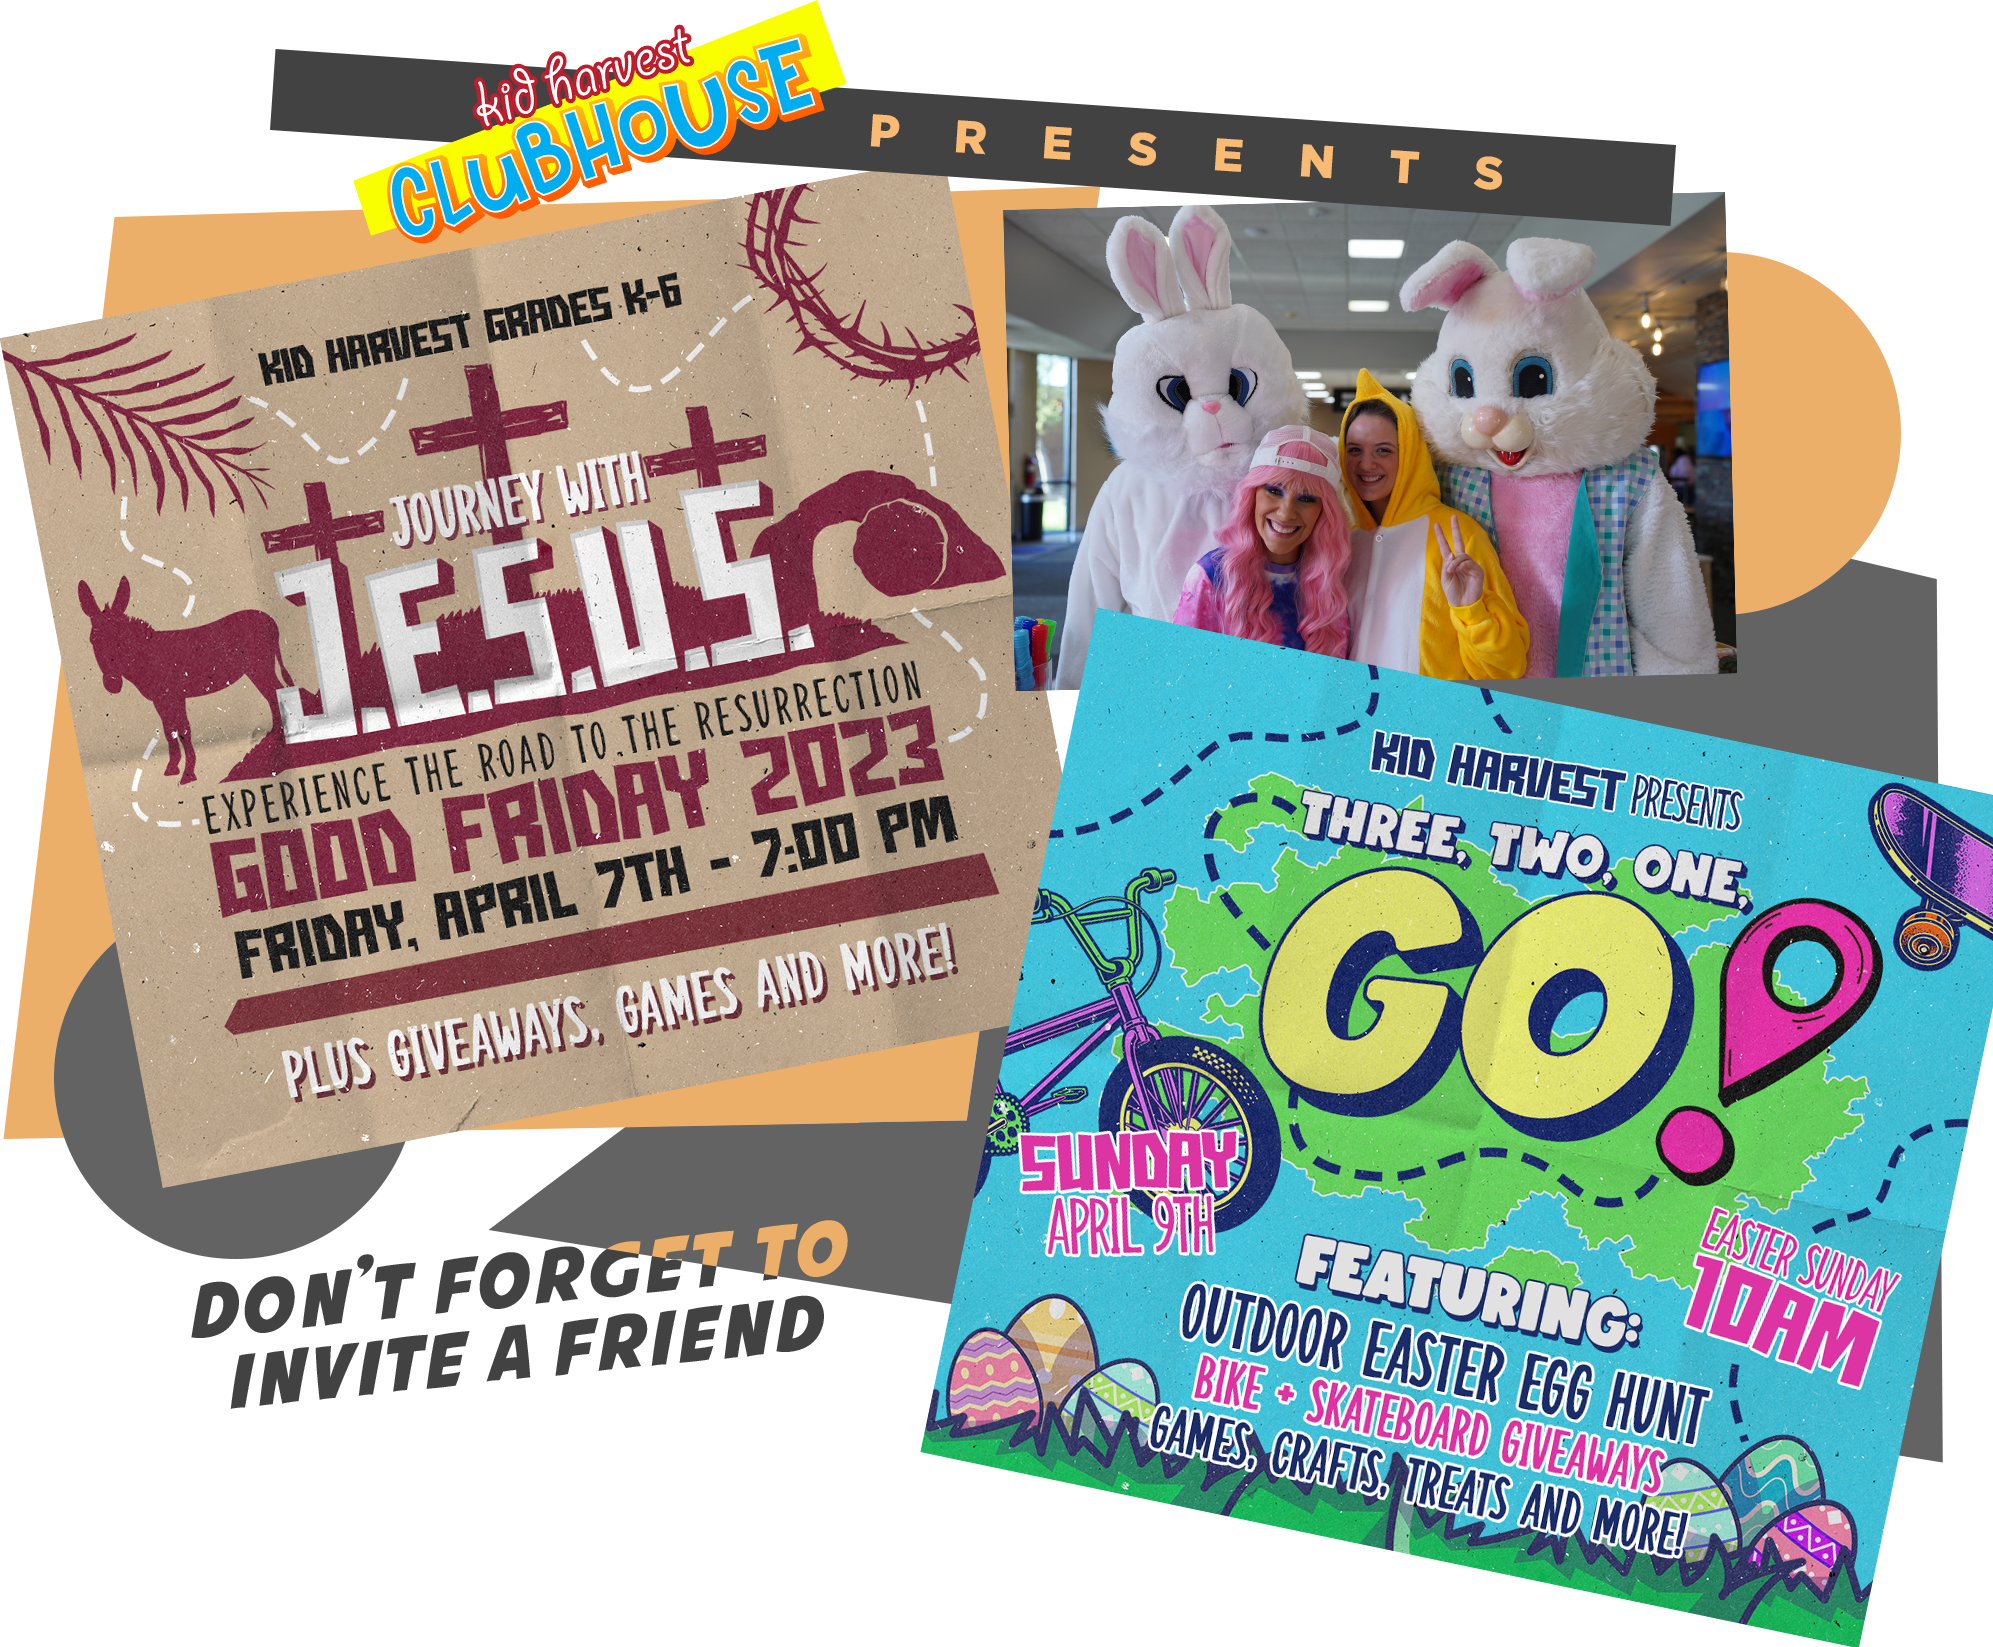 April 7th 7pm Easter Weekend April 9th 10am